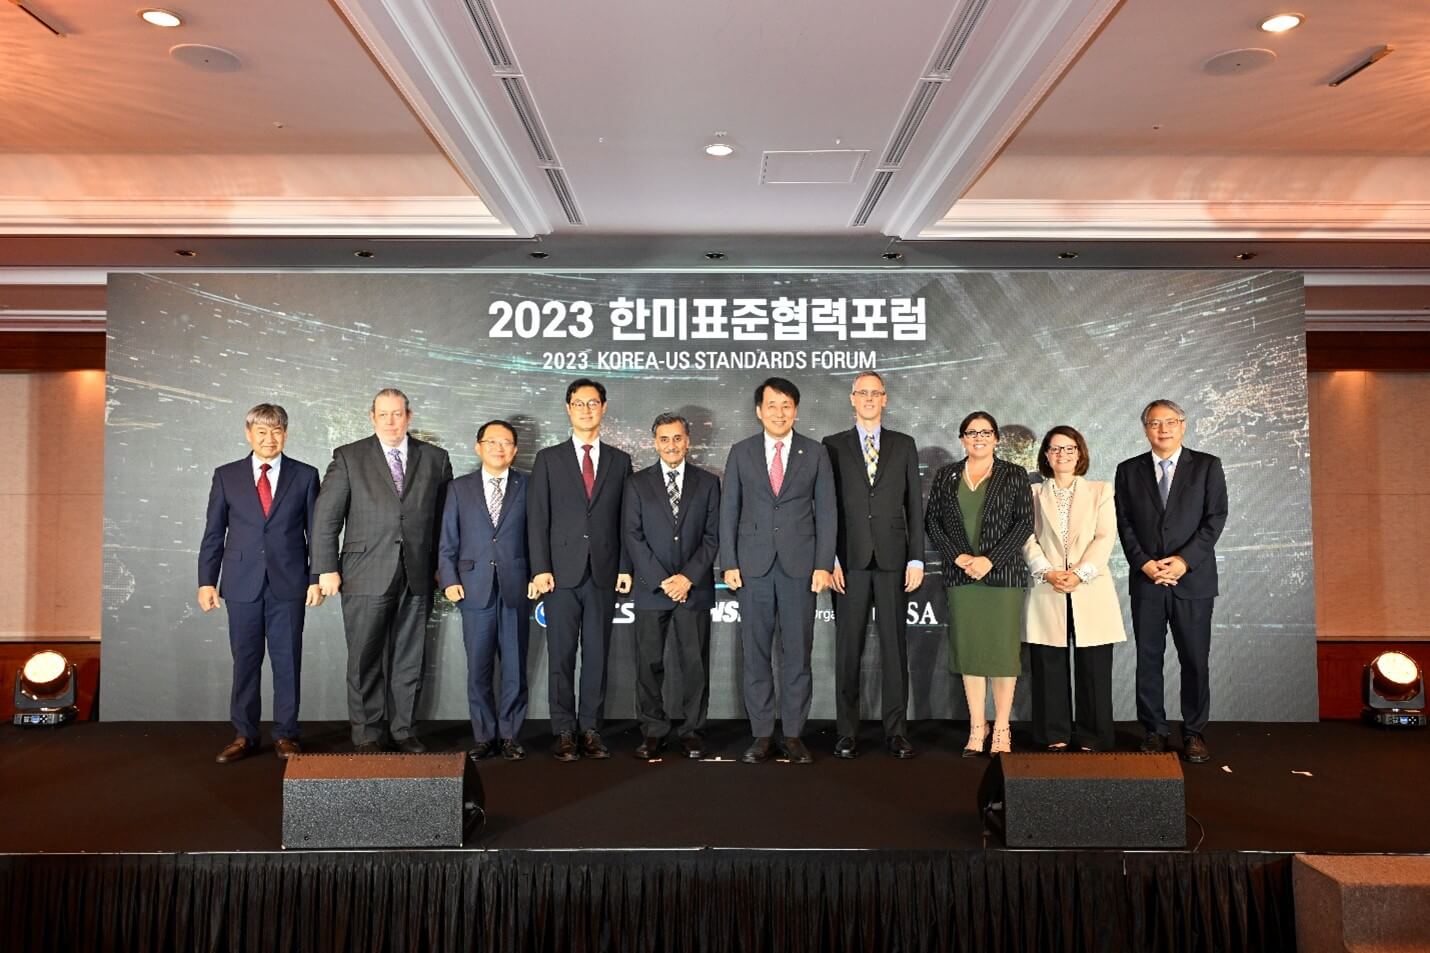 Group picture at the 2023 Korea-U.S. Standards Forum